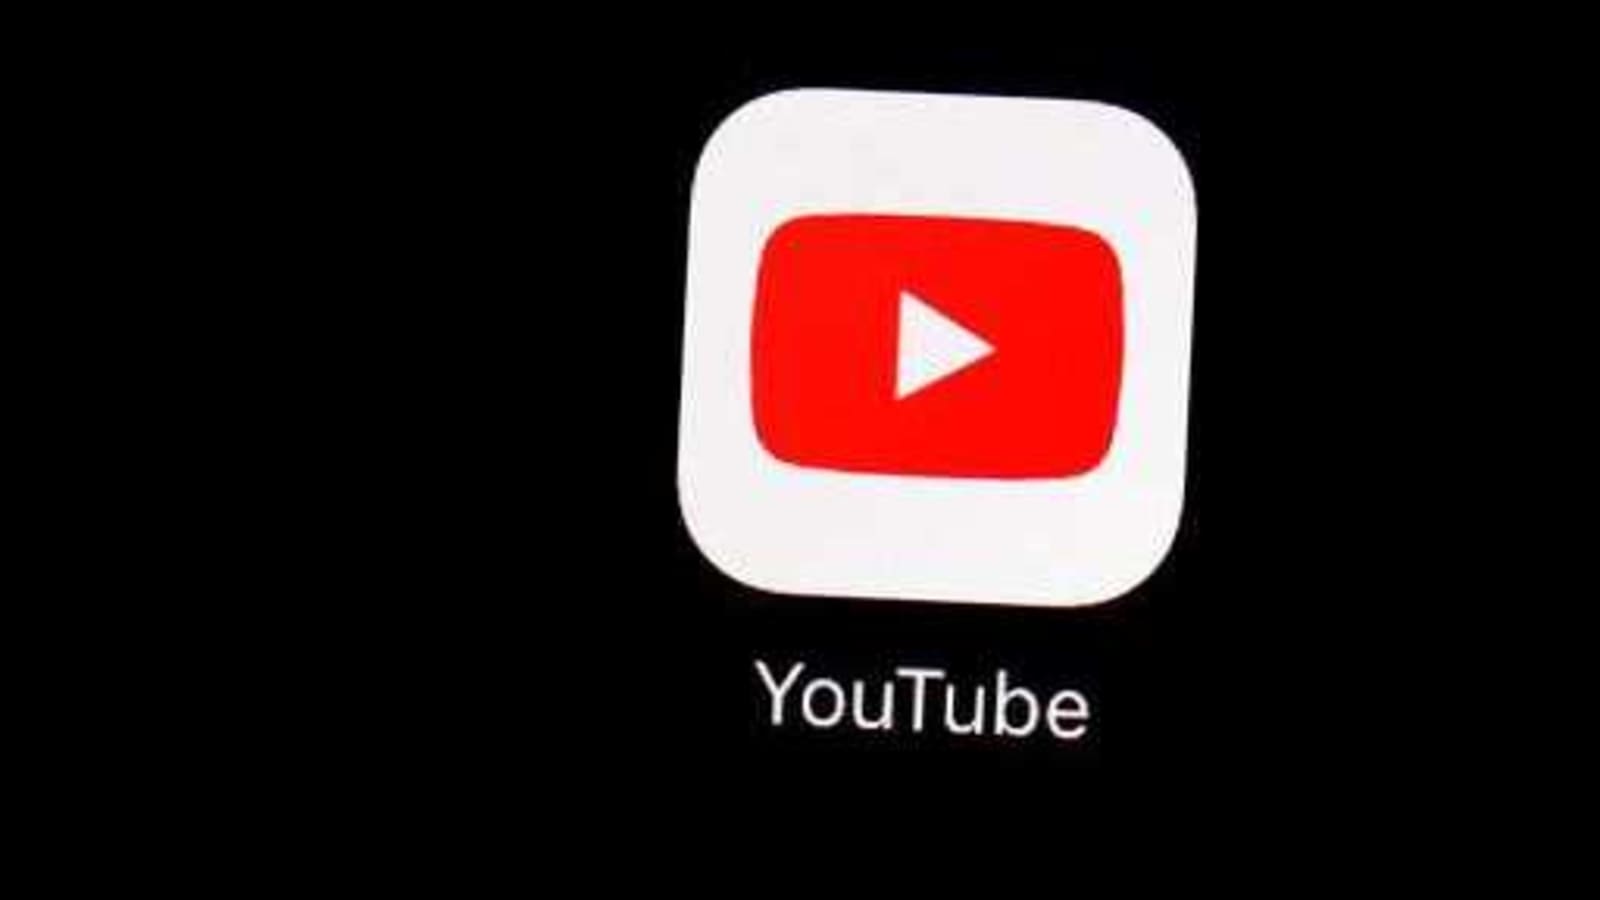 YouTube accounts livestream fake election results to thousands | Tech News